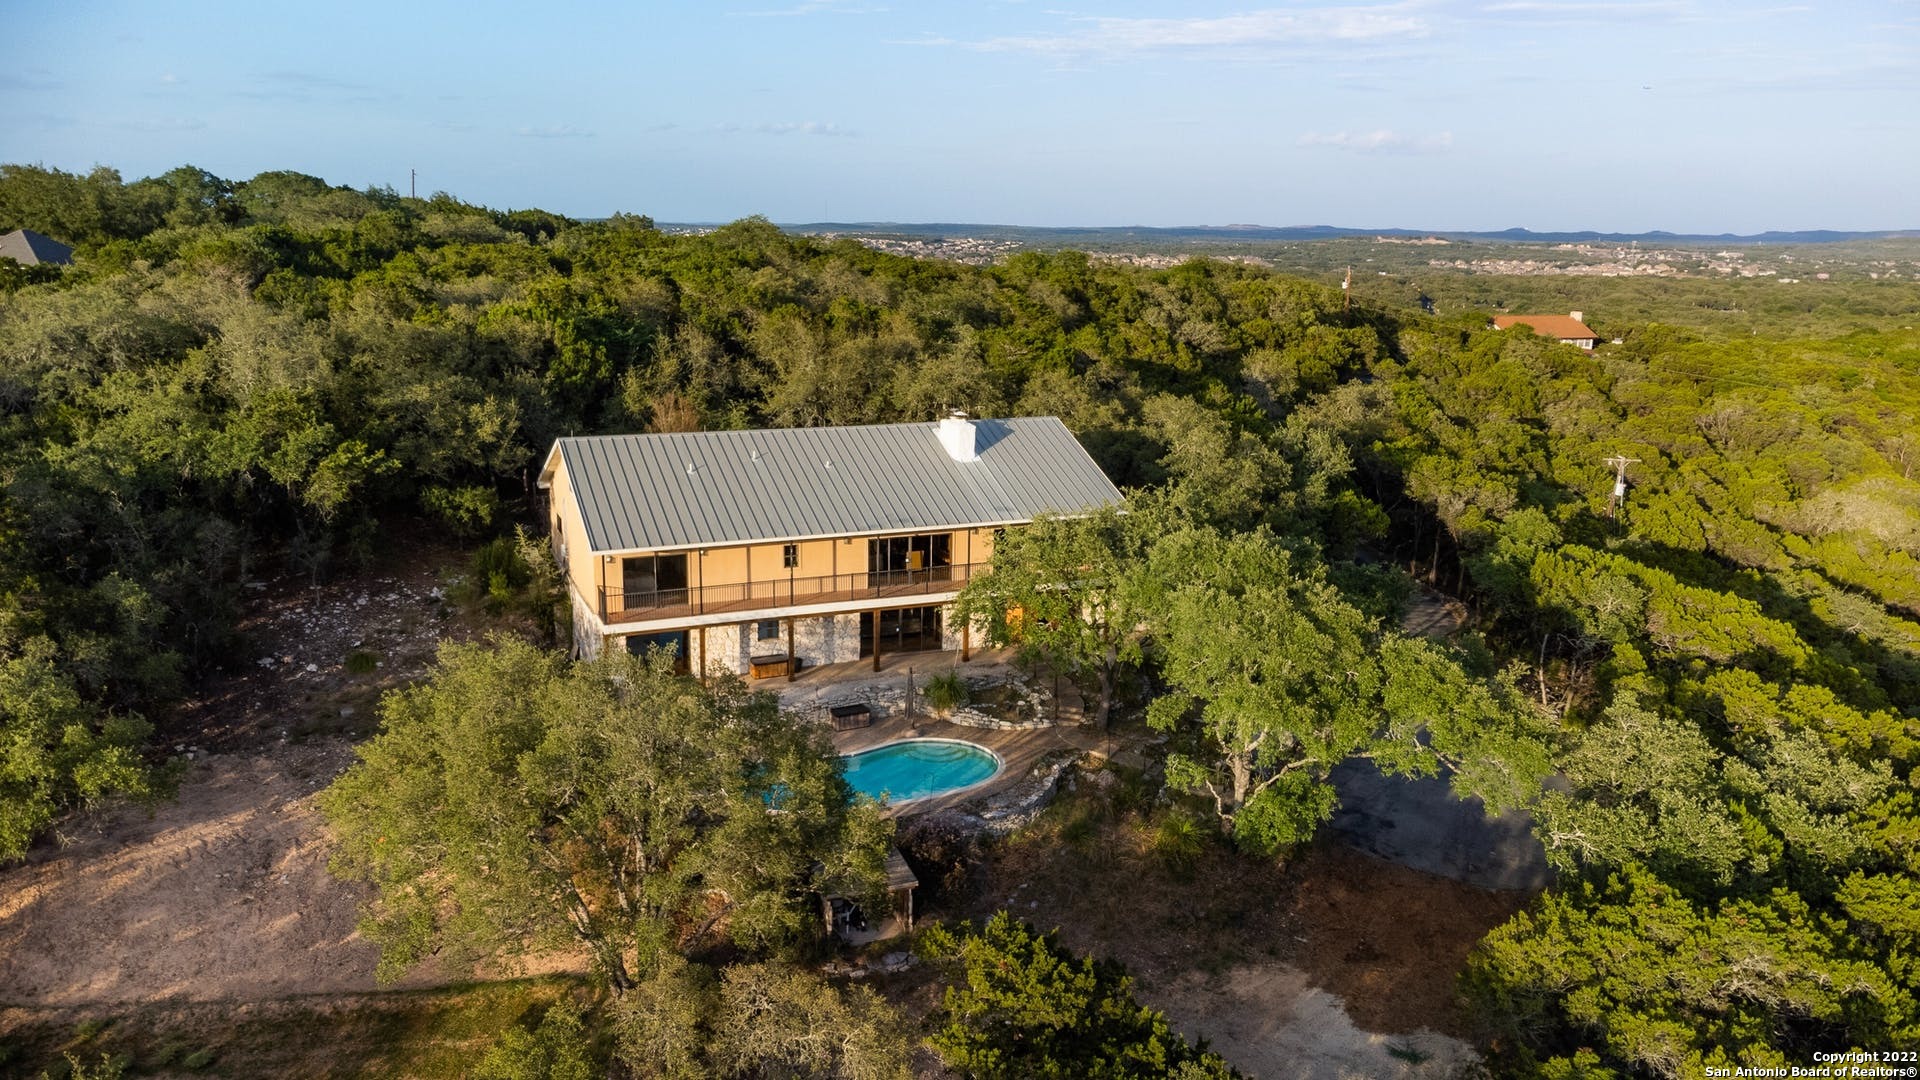 Welcome to the Boerne Hill Country at its best. This ranch style home stuns with 180-degree views that are some of the finest in town. Outdoor living space does not disappoint with pool, extra-large deck for entertaining and balcony that runs the entire length of the house, just so you can catch those amazing sunsets. The seclusion and tranquility start at the entrance of the property as you come up the long driveway and suddenly you are taken away from the hustle and bustle. Your very own gated 2.88-acre retreat. This beautiful home boasts spacious living in every room. 4 bedrooms 3 full baths 2 half baths. Two living spaces (one up and one down both with fireplace). Ensuite bedroom downstairs. Large Dining room. Great sized kitchen with island and walk-in pantry. Two additional bedrooms with shared jack and jill bathroom. Master bedroom with walk-in closet and attached bathroom. Every room takes in the spectacular views. Home has 2 car garage, new aerobic septic drip field system, excellent well water filtration system, water softener, and two extra-large Marathon hot water tanks, and HVAC system partially updated. Well has been updated. HOA is voluntary. Property set-up would be great as bed and breakfast. With this home you will be close to everything but feel like you've found paradise.